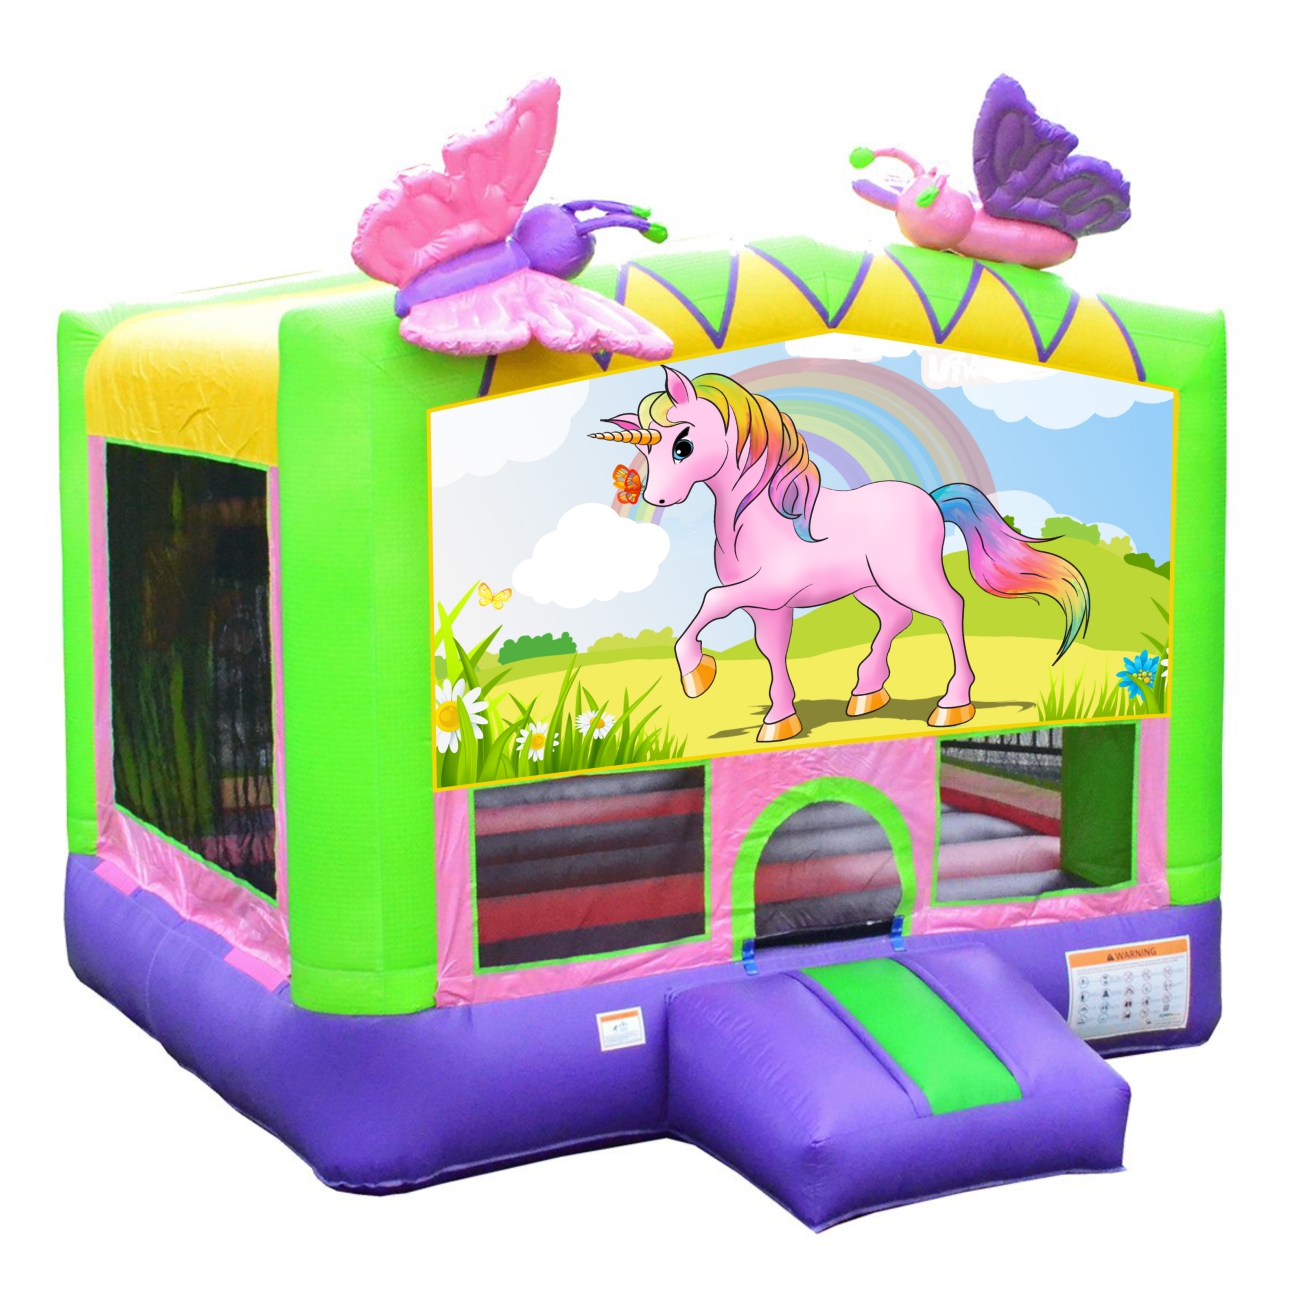 Chelsea Party Center, LLC - bounce house rentals and slides for